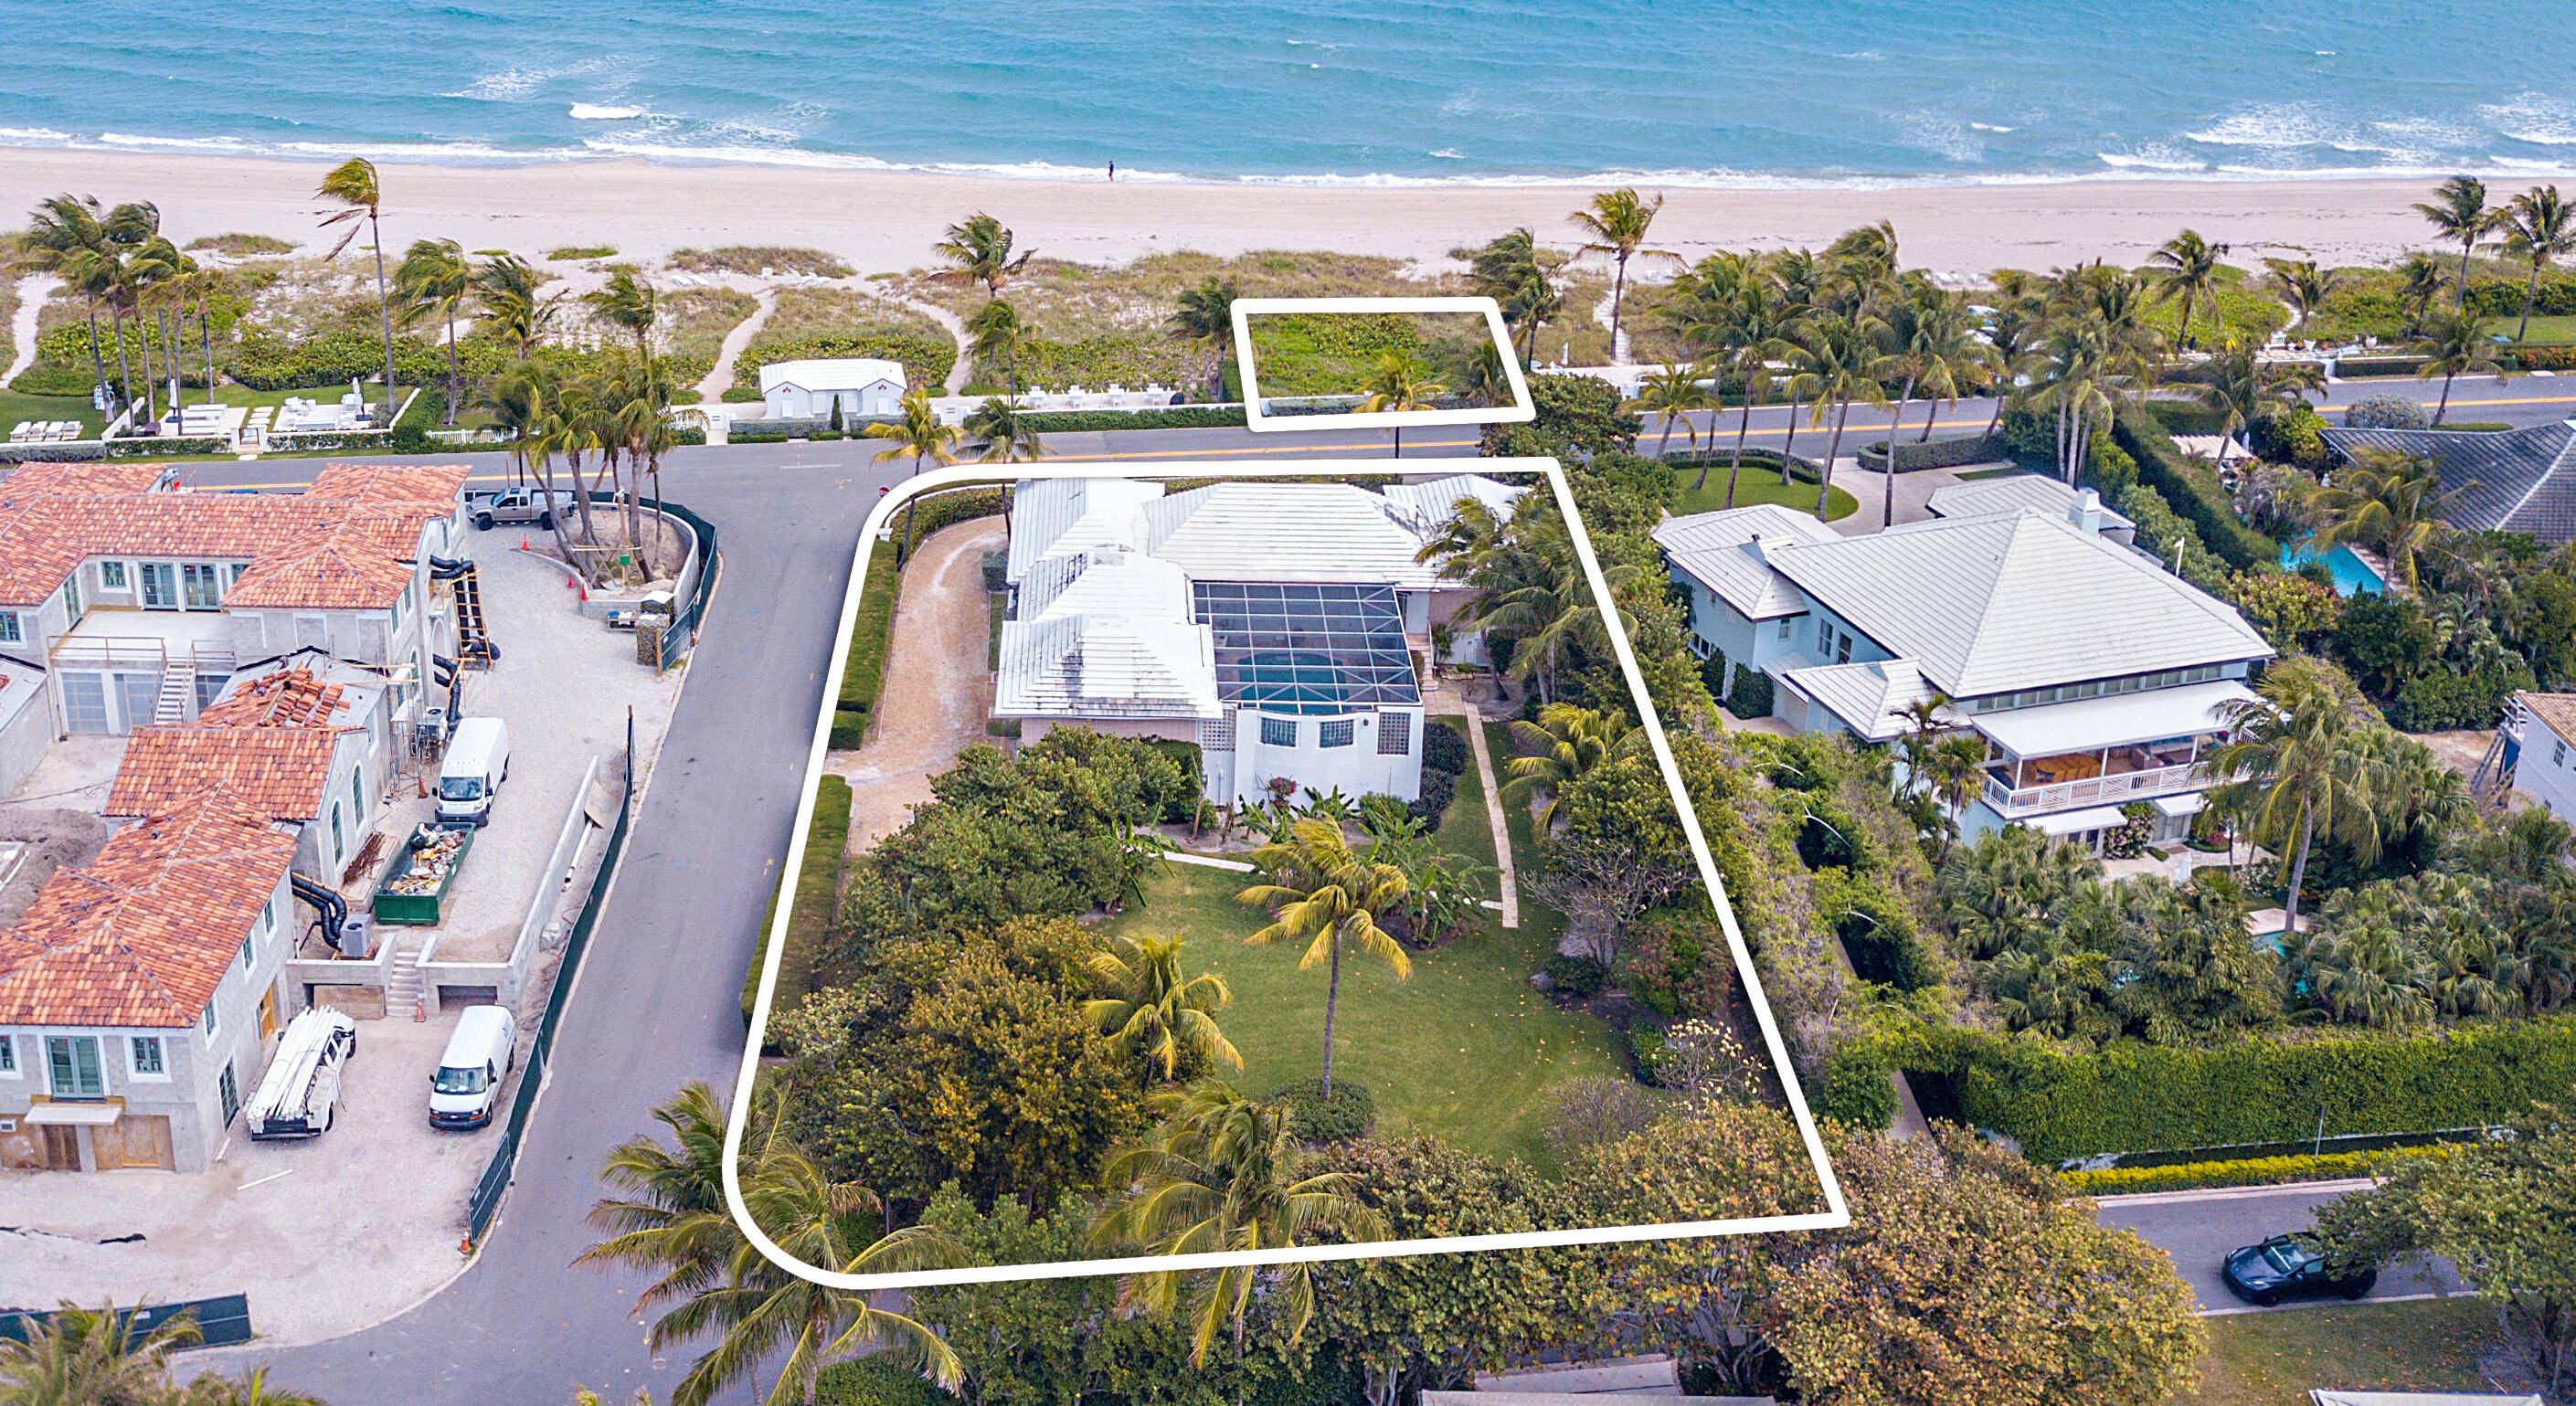 This property has over 25, 000 SF of land with its own 50' x 17' private beach parcel.